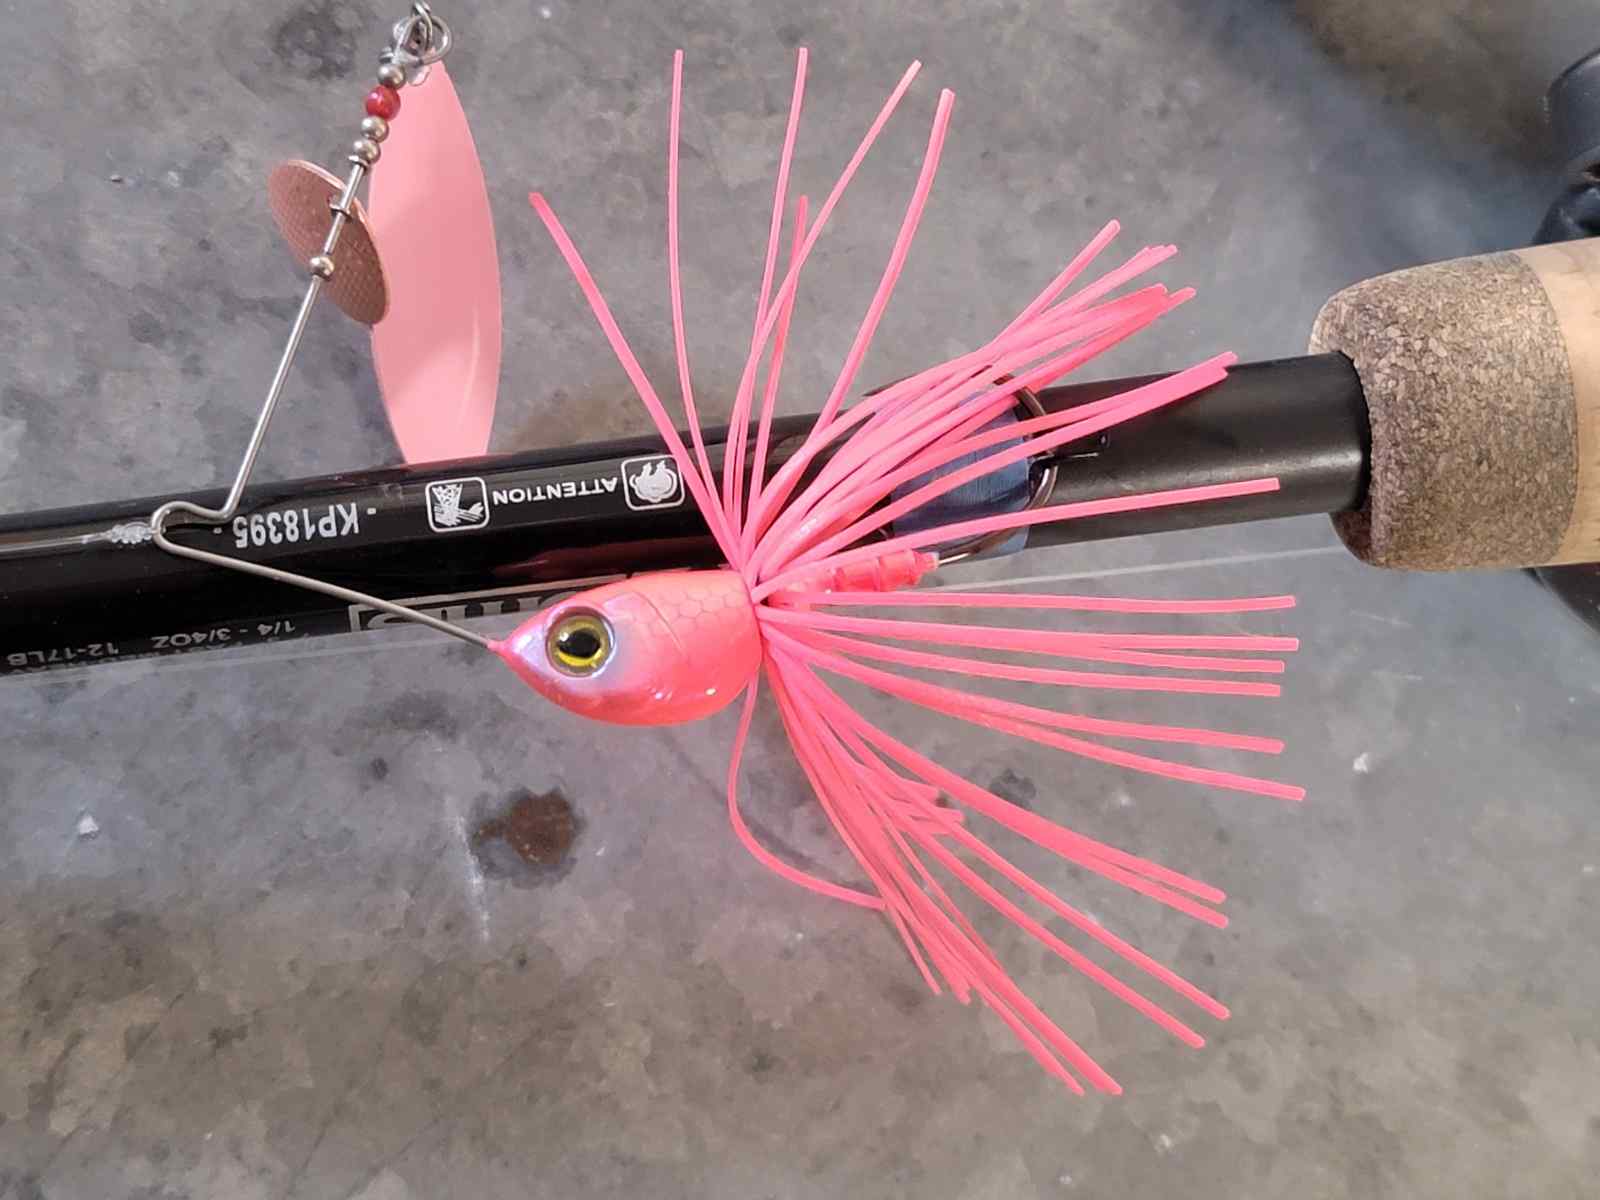 Double willow vs tandem spinnerbait - Fishing Tackle - Bass Fishing Forums